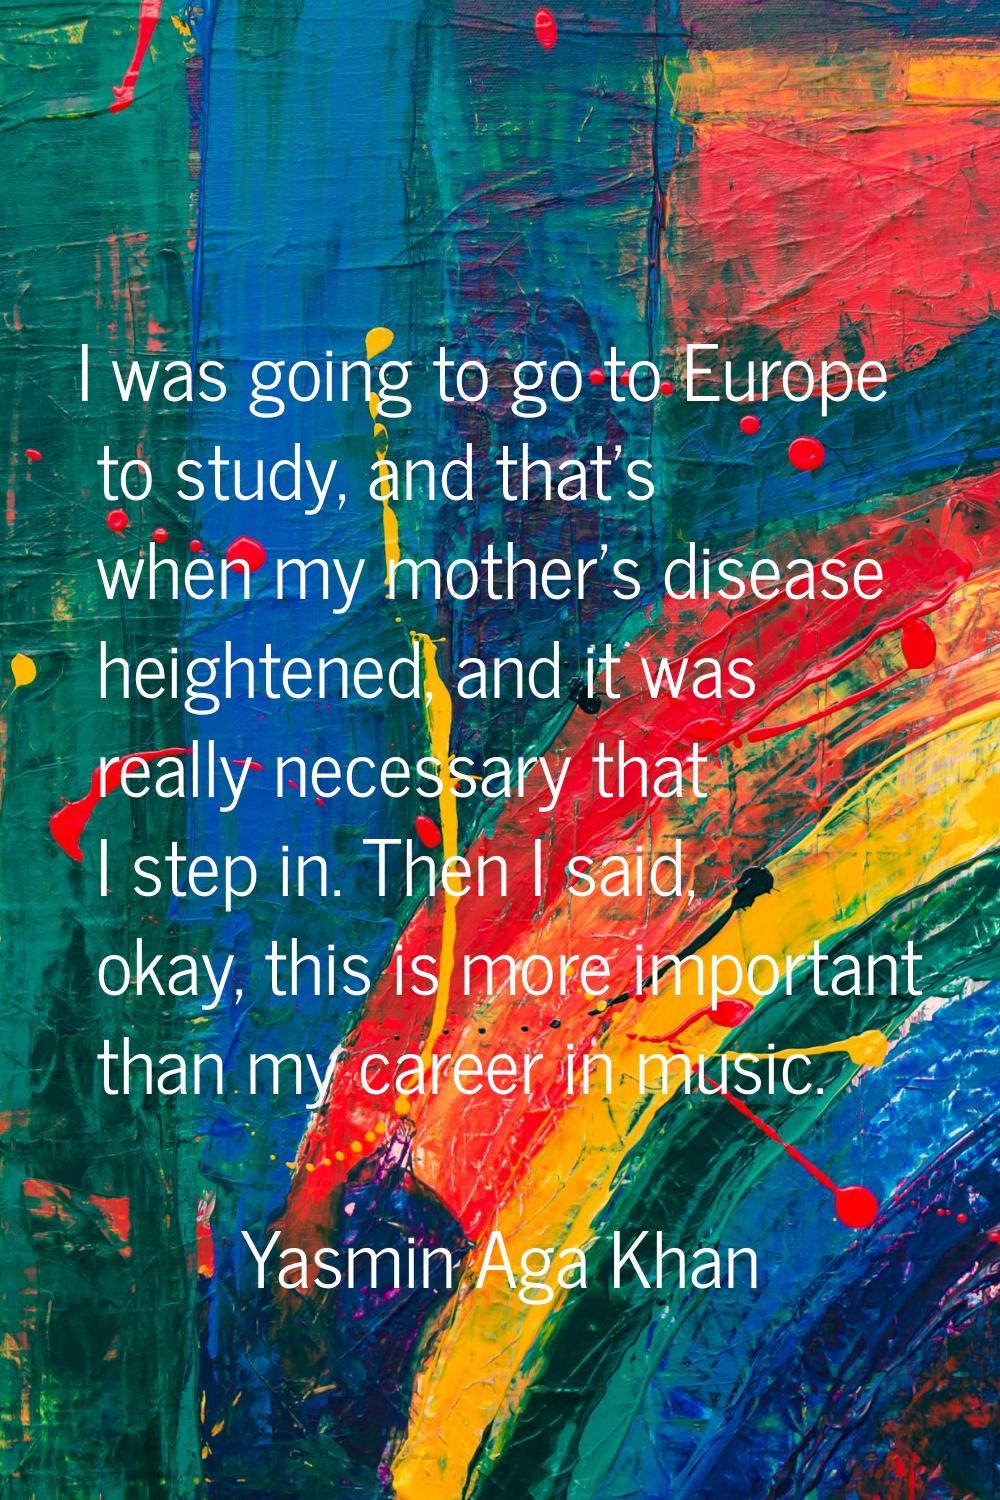 I was going to go to Europe to study, and that's when my mother's disease heightened, and it was re